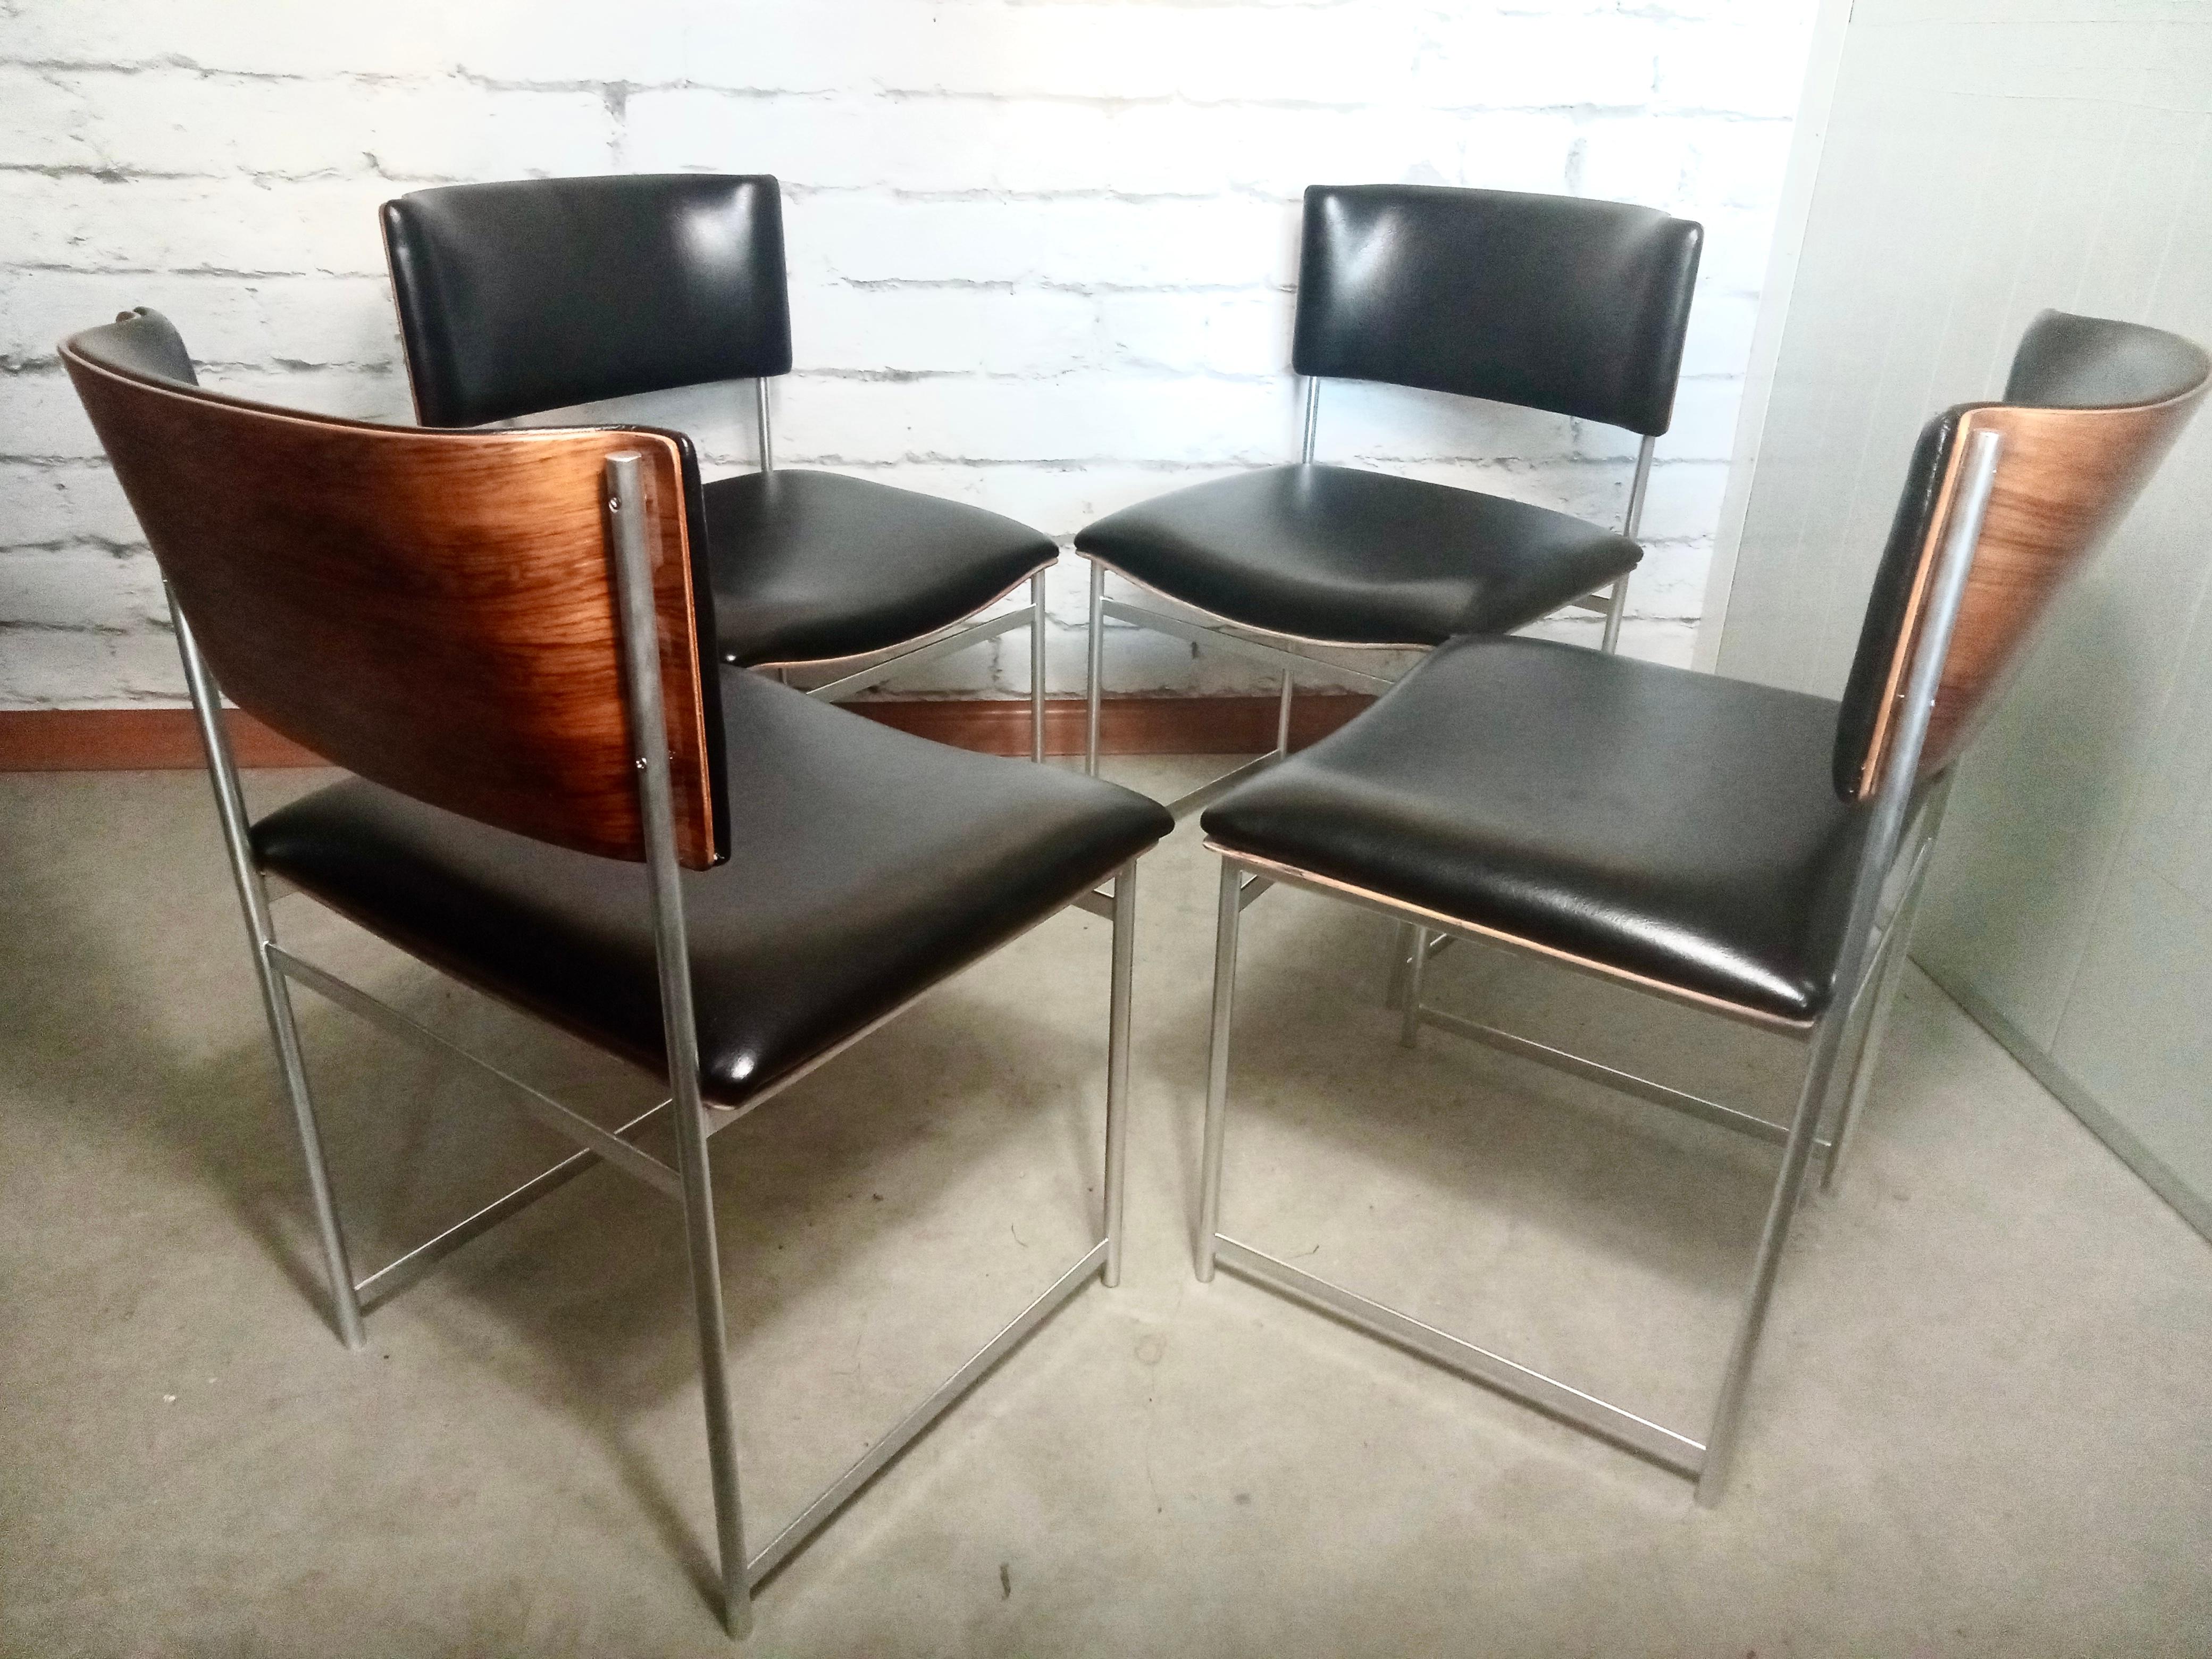 Mid-20th Century Sm08 Pastoe Chairs by Cees Braakman, 1950’s